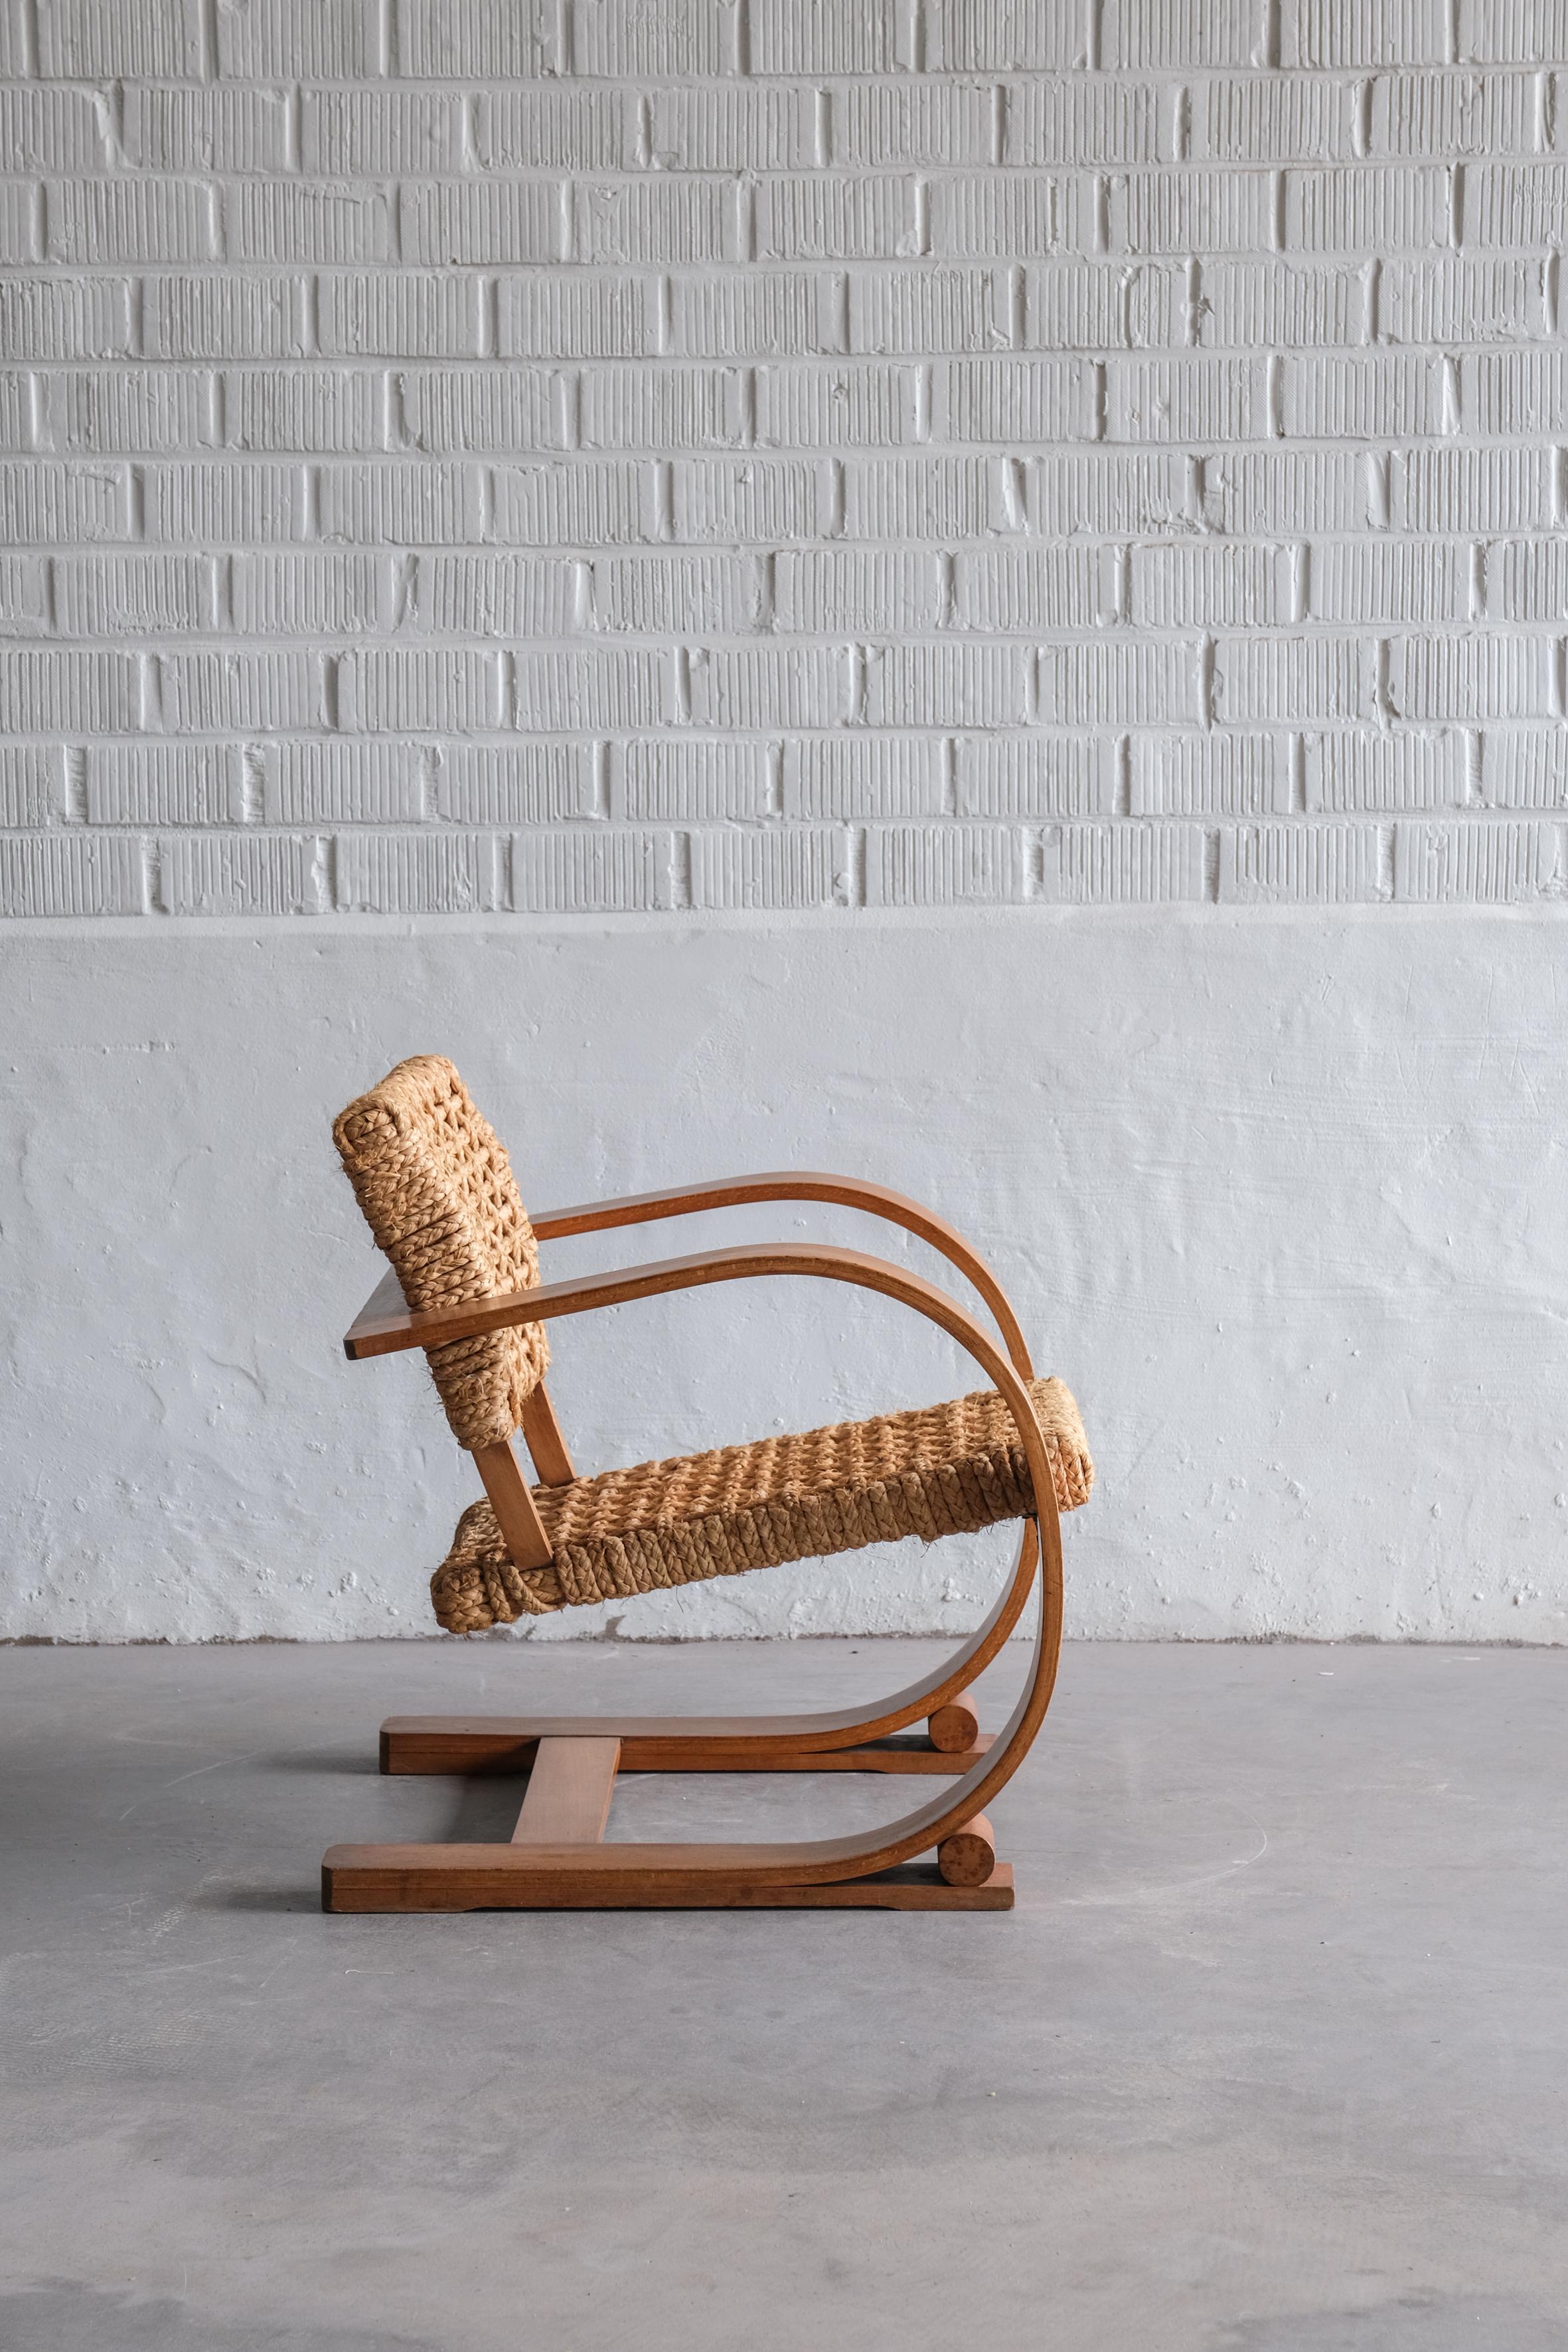 Mid-Century Modern Lounge chair also known as Rope chair by Audoux Minet 1950